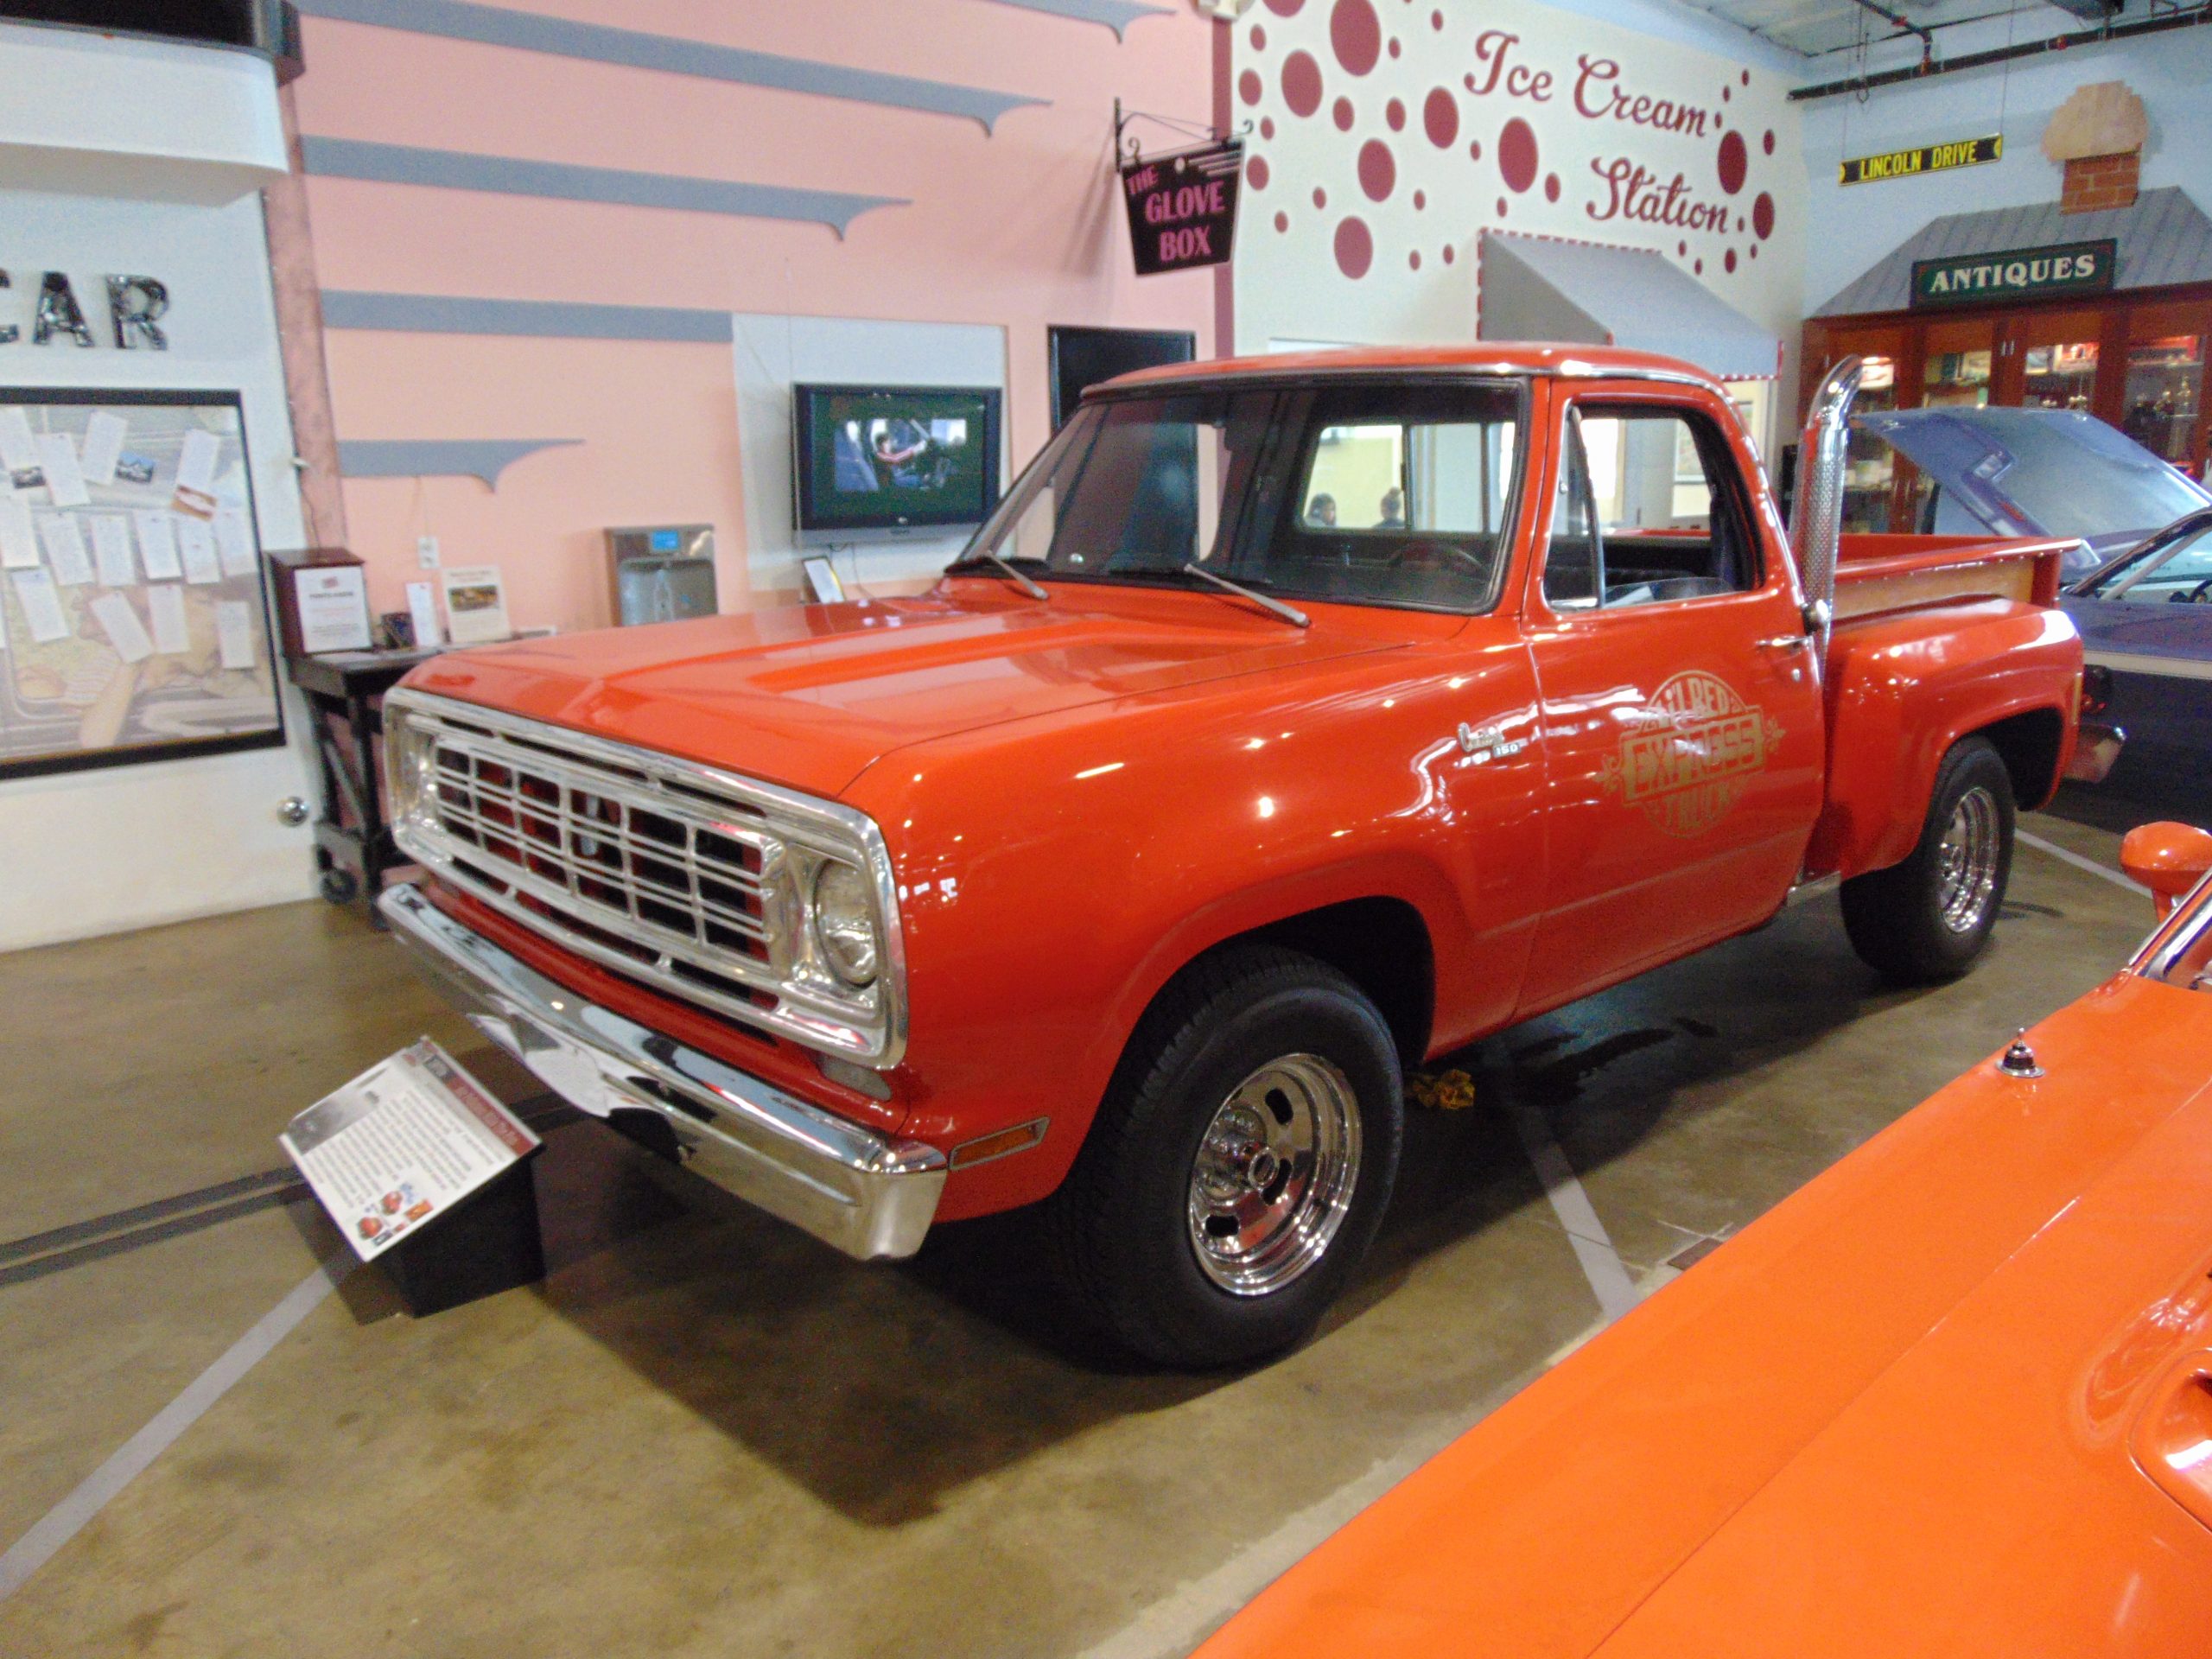 1976 Dodge Truck for rent